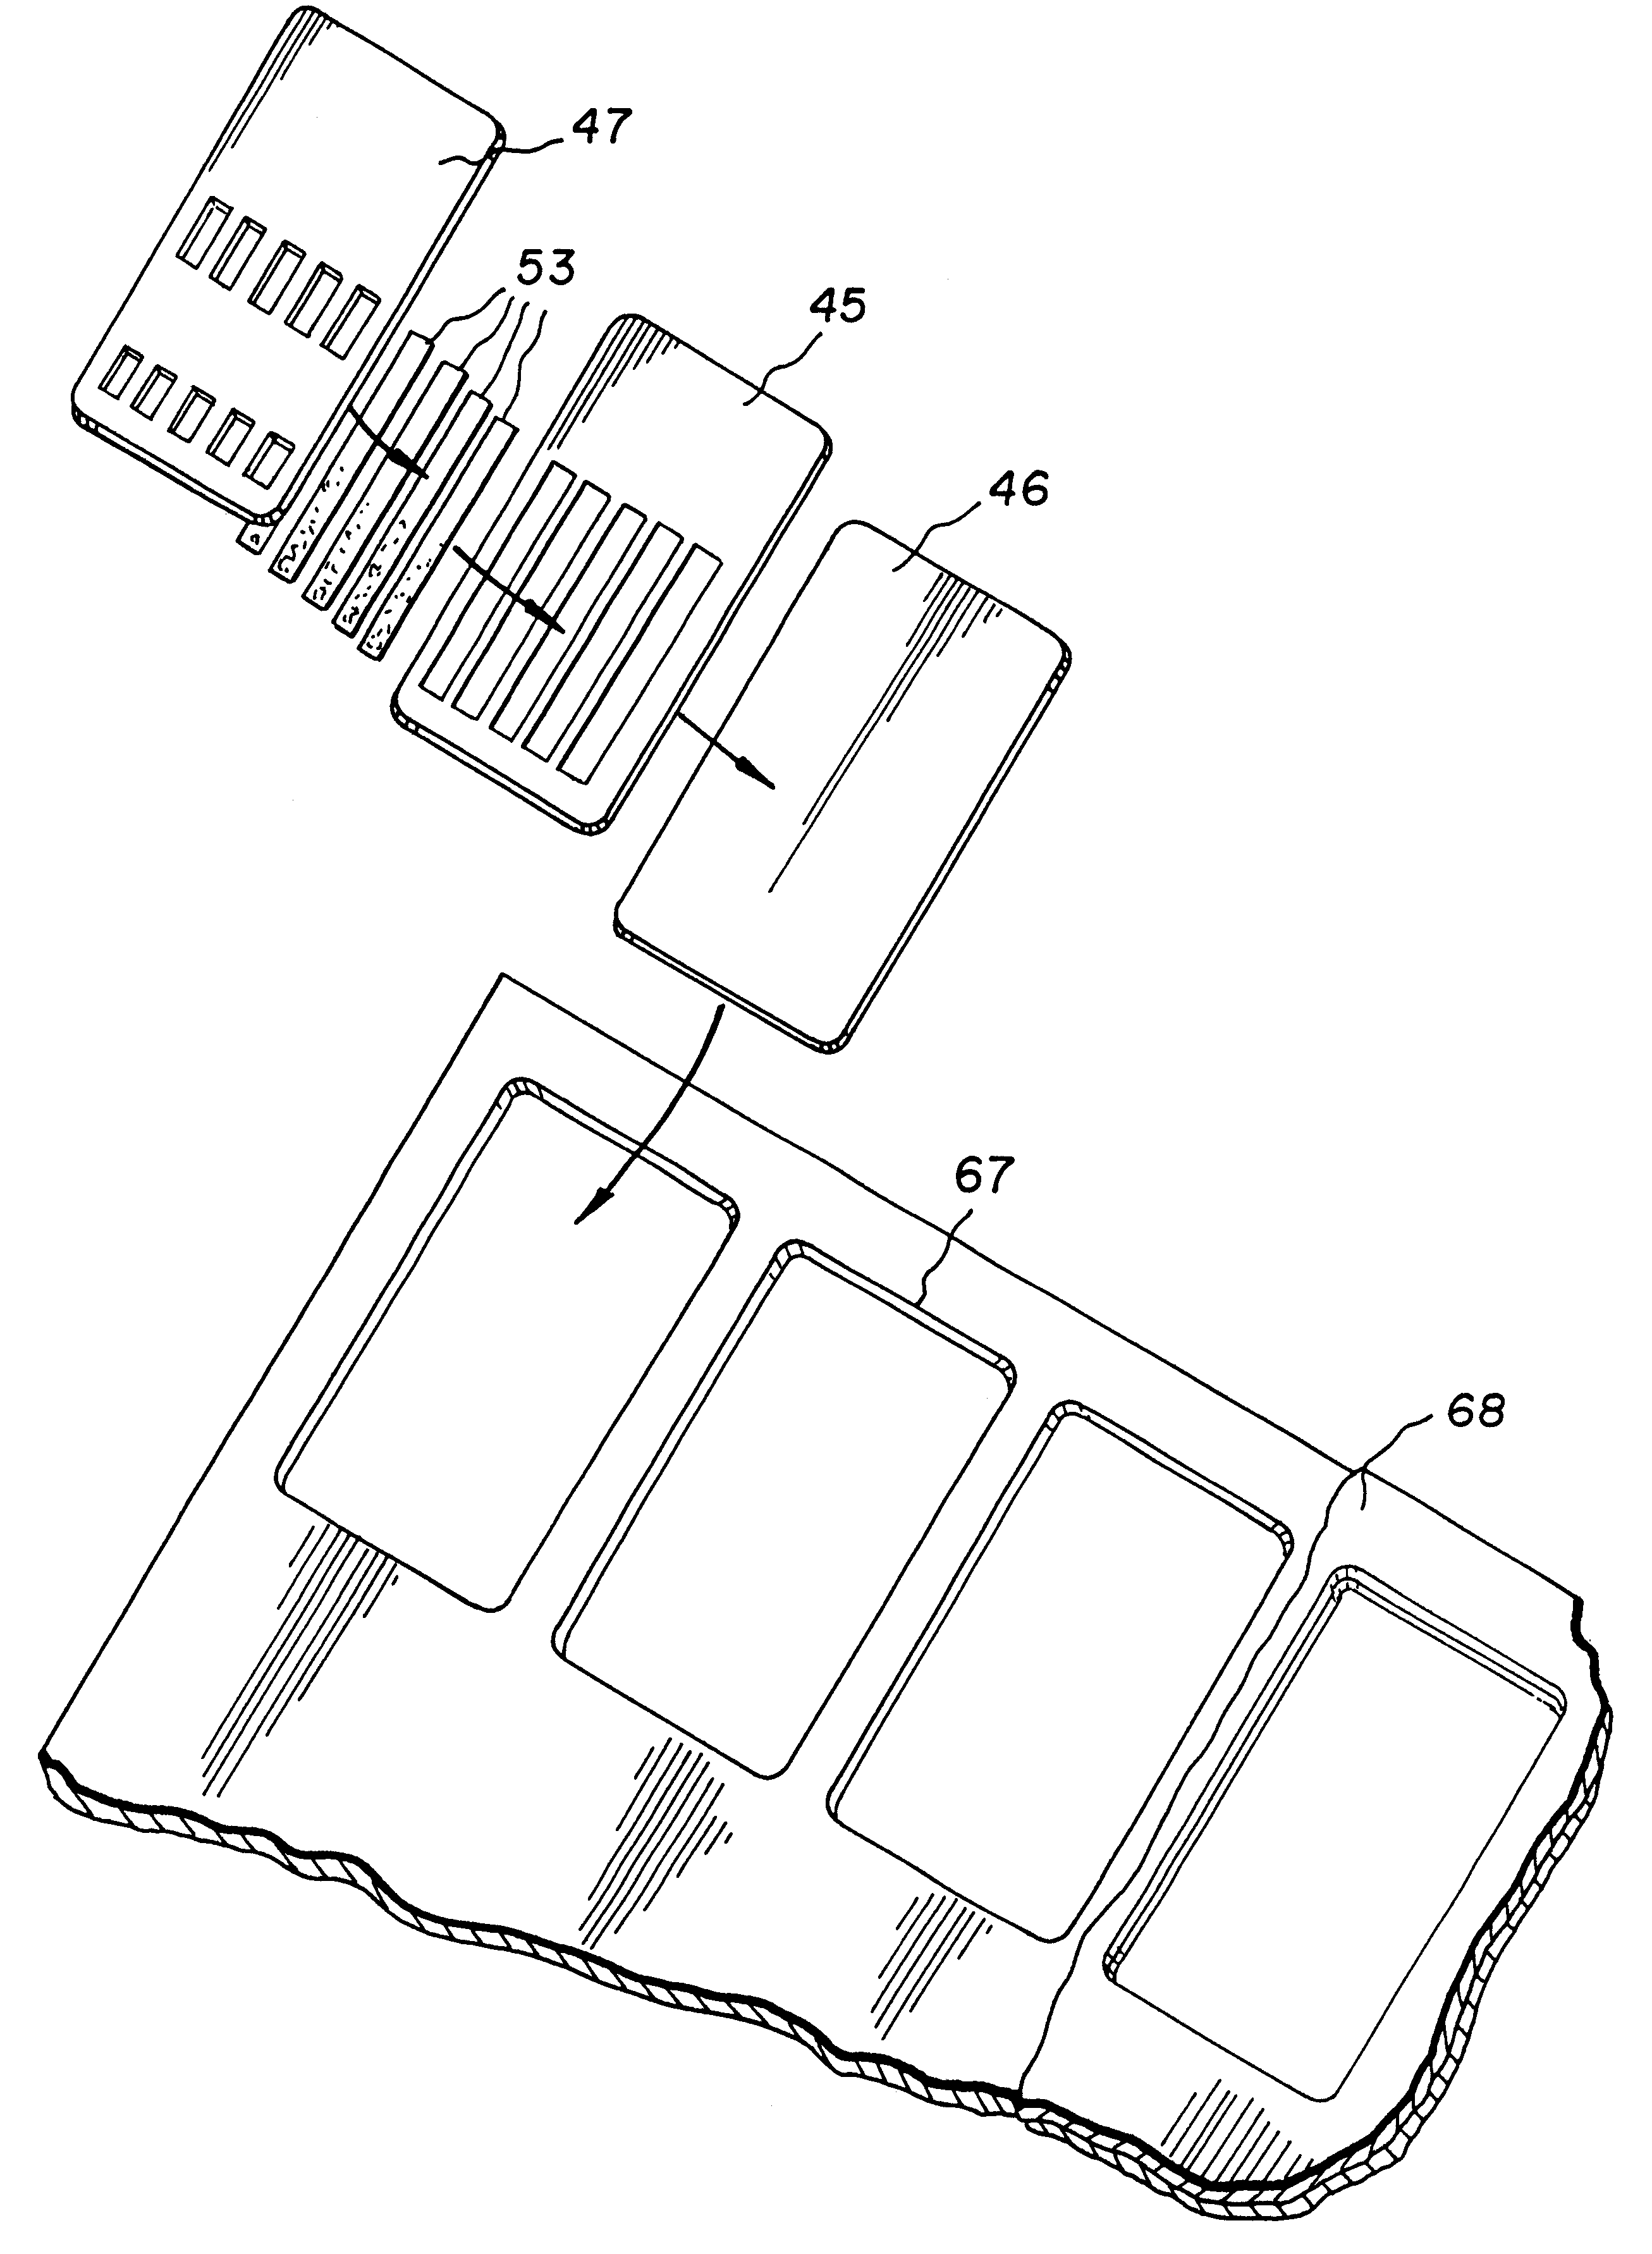 Device for the testing of fluid samples and process for making the device